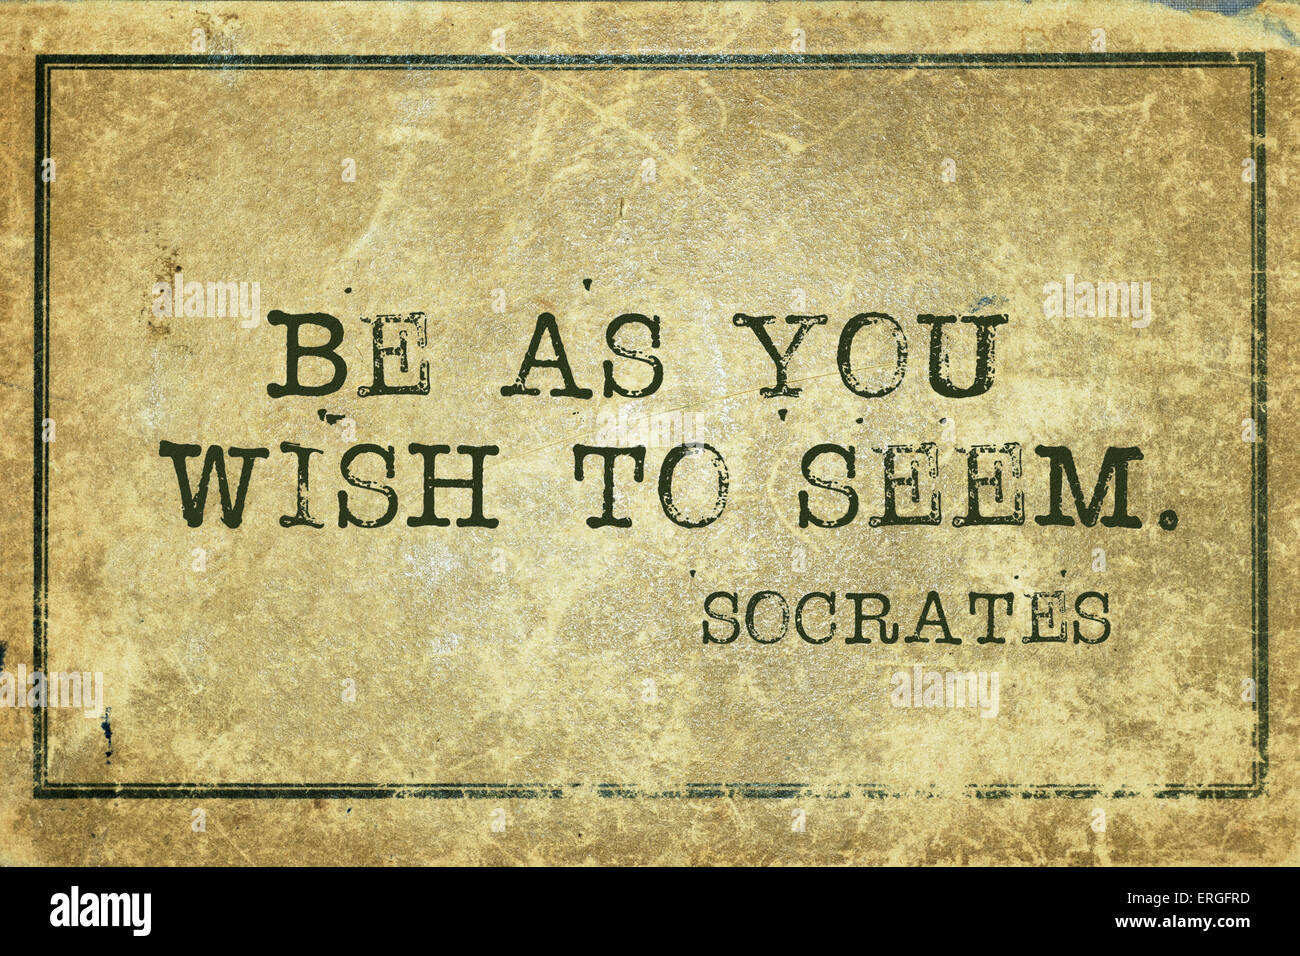 Be as you wish to seem - ancient Greek philosopher Socrates quote printed on grunge vintage cardboard Stock Photo